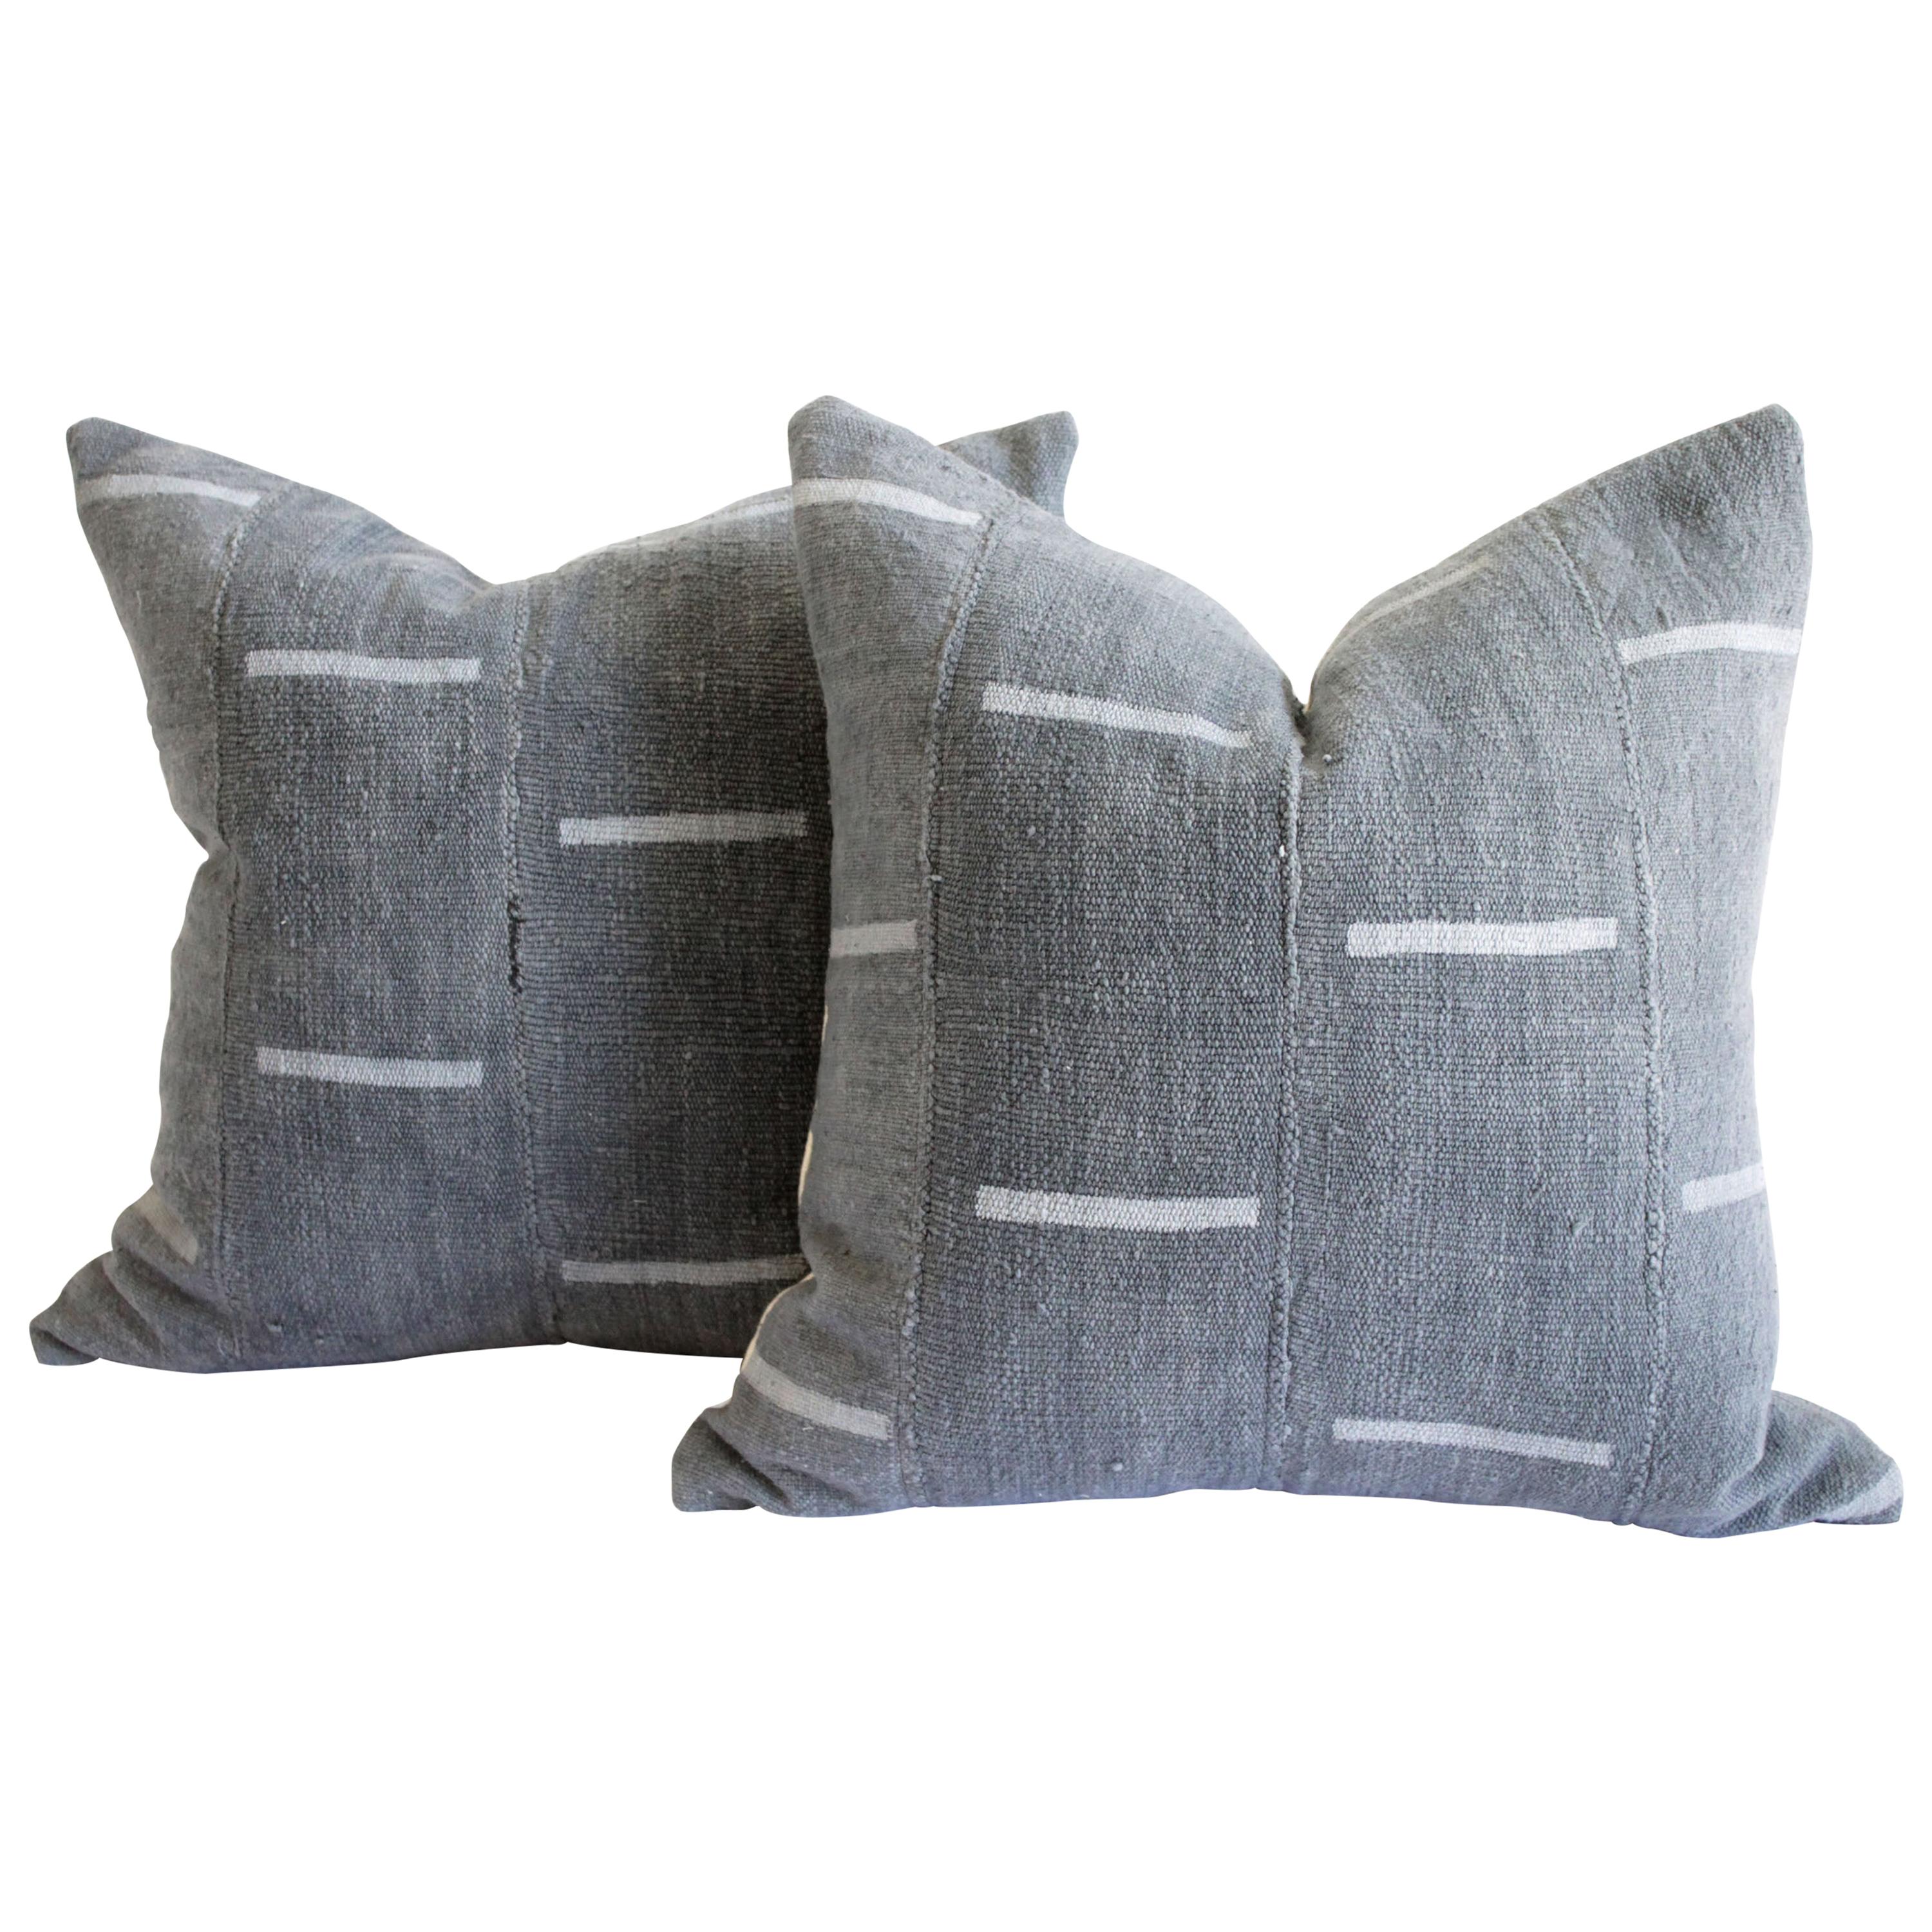 Vintage Mud Cloth Pillow in Gray Blue with Light Gray Stripes